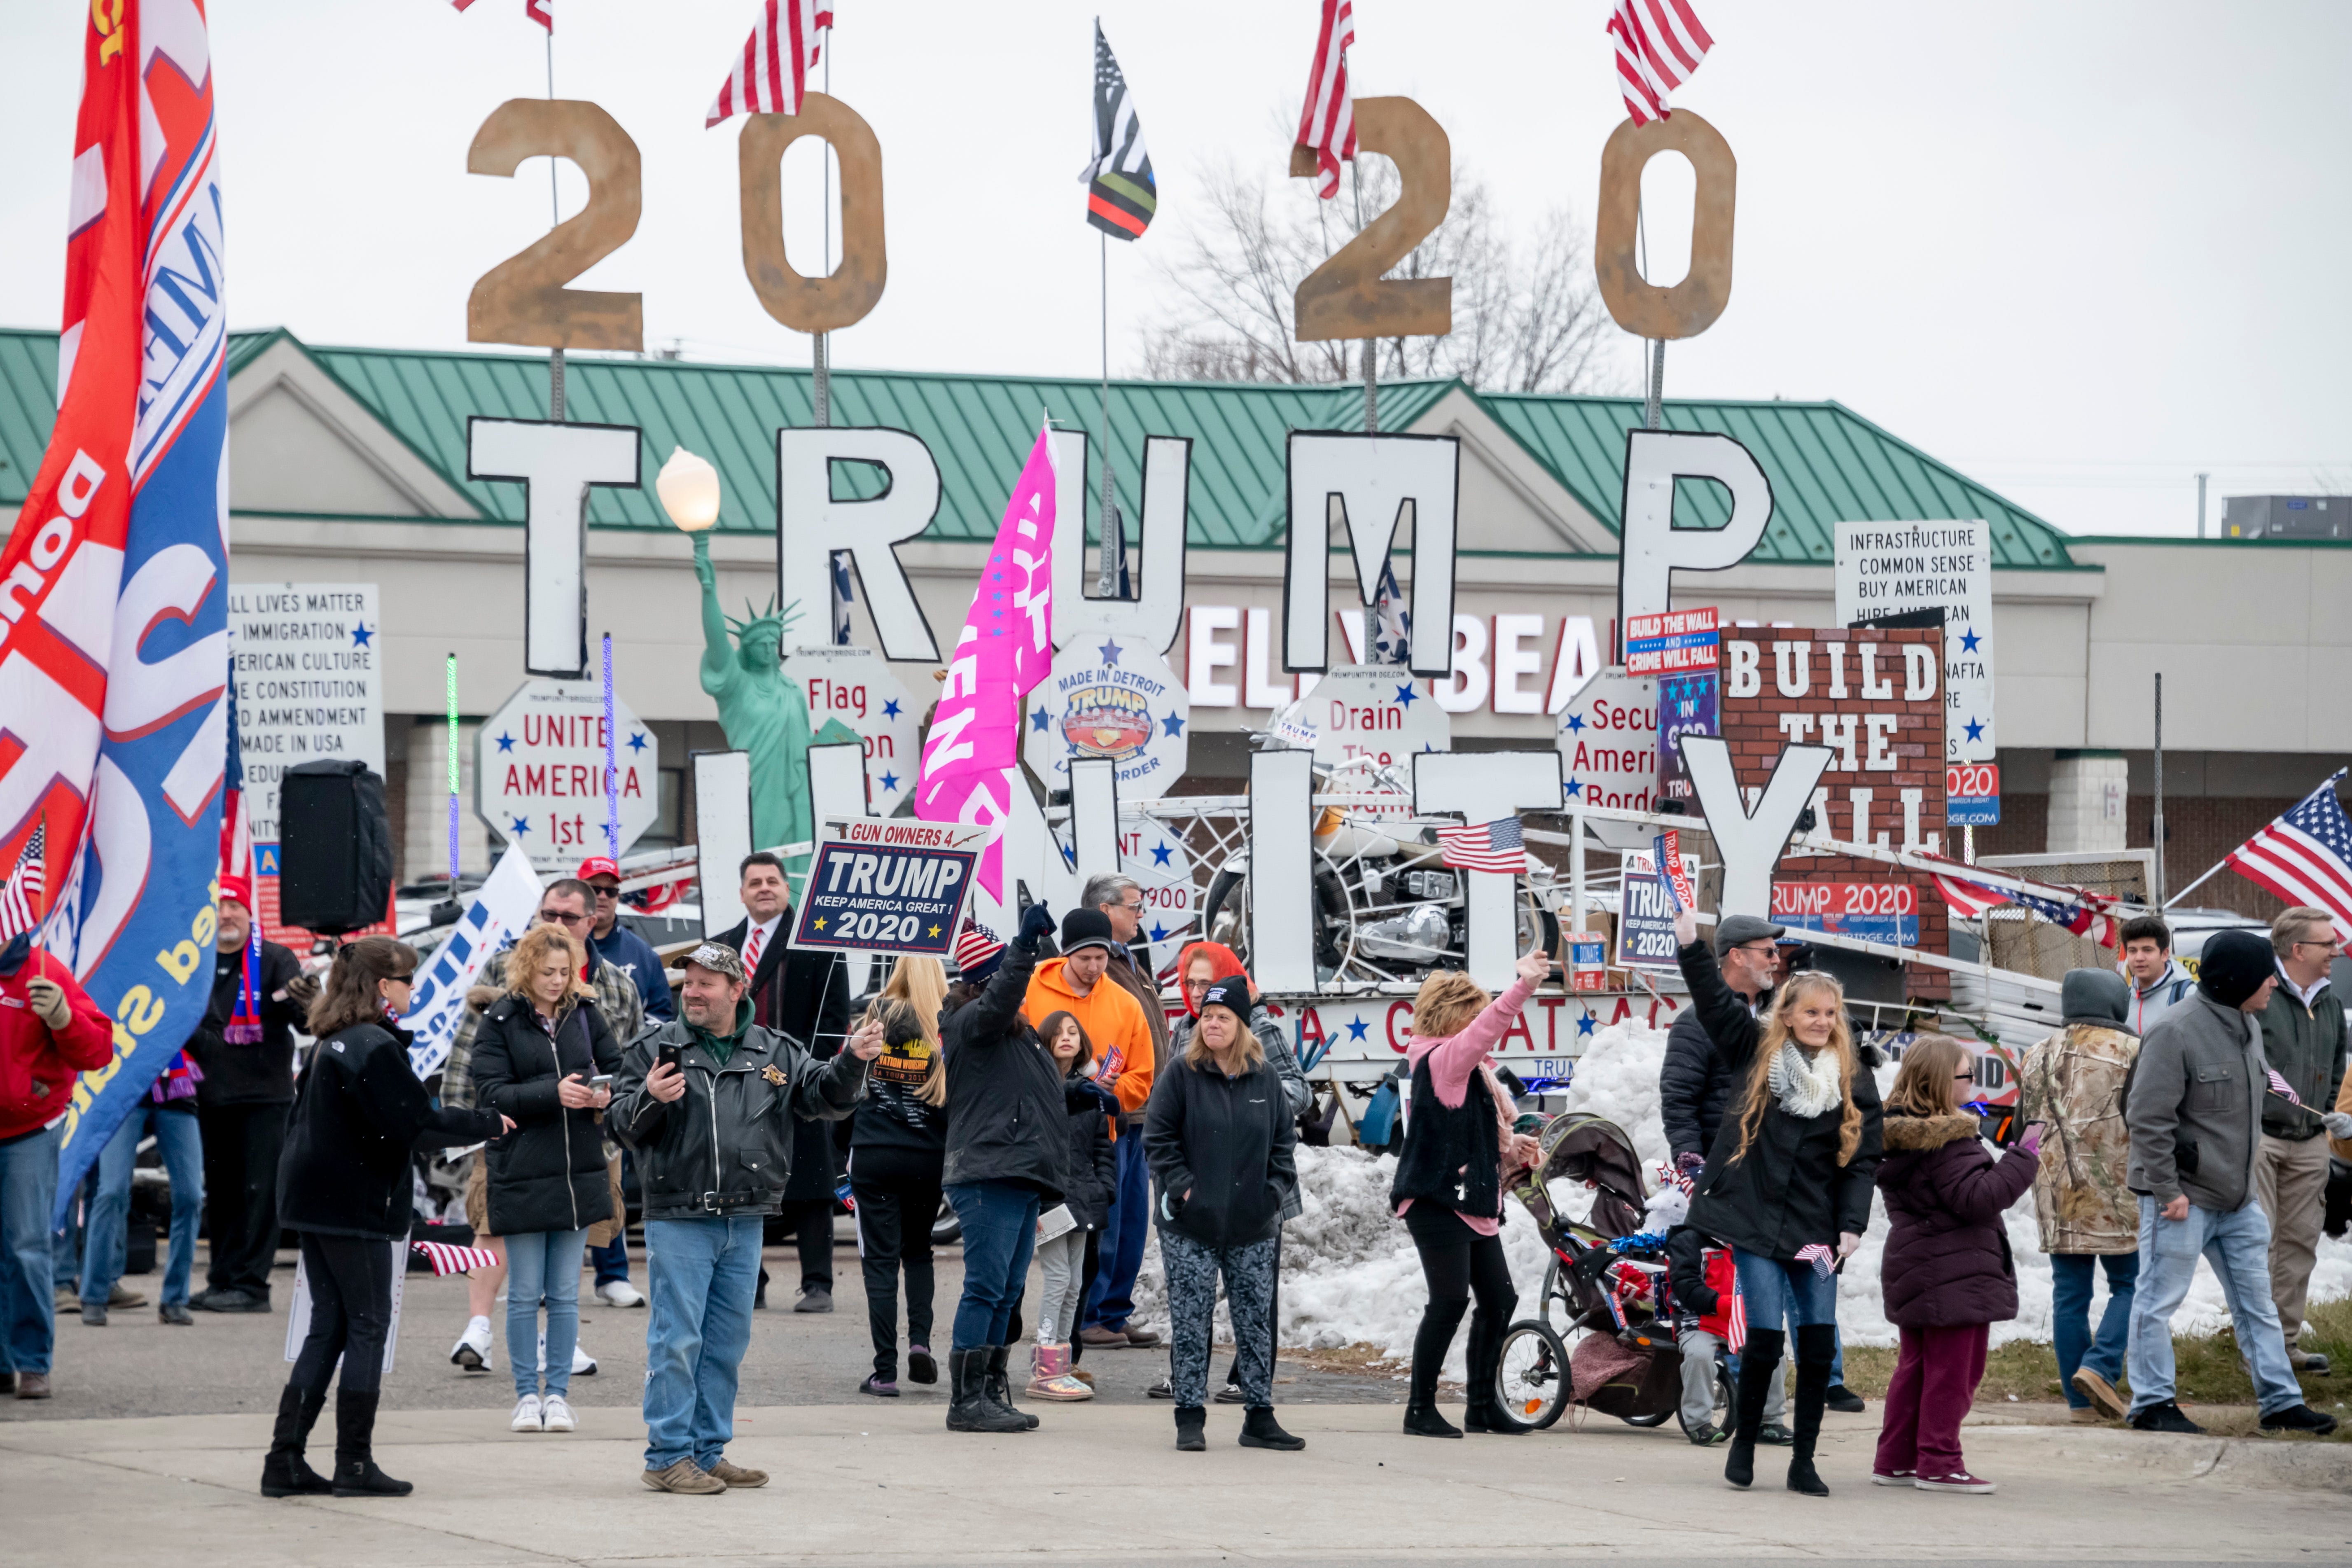 Supporters wave signs and flags while waiting along Van Dyke for the arrival of President Trump.